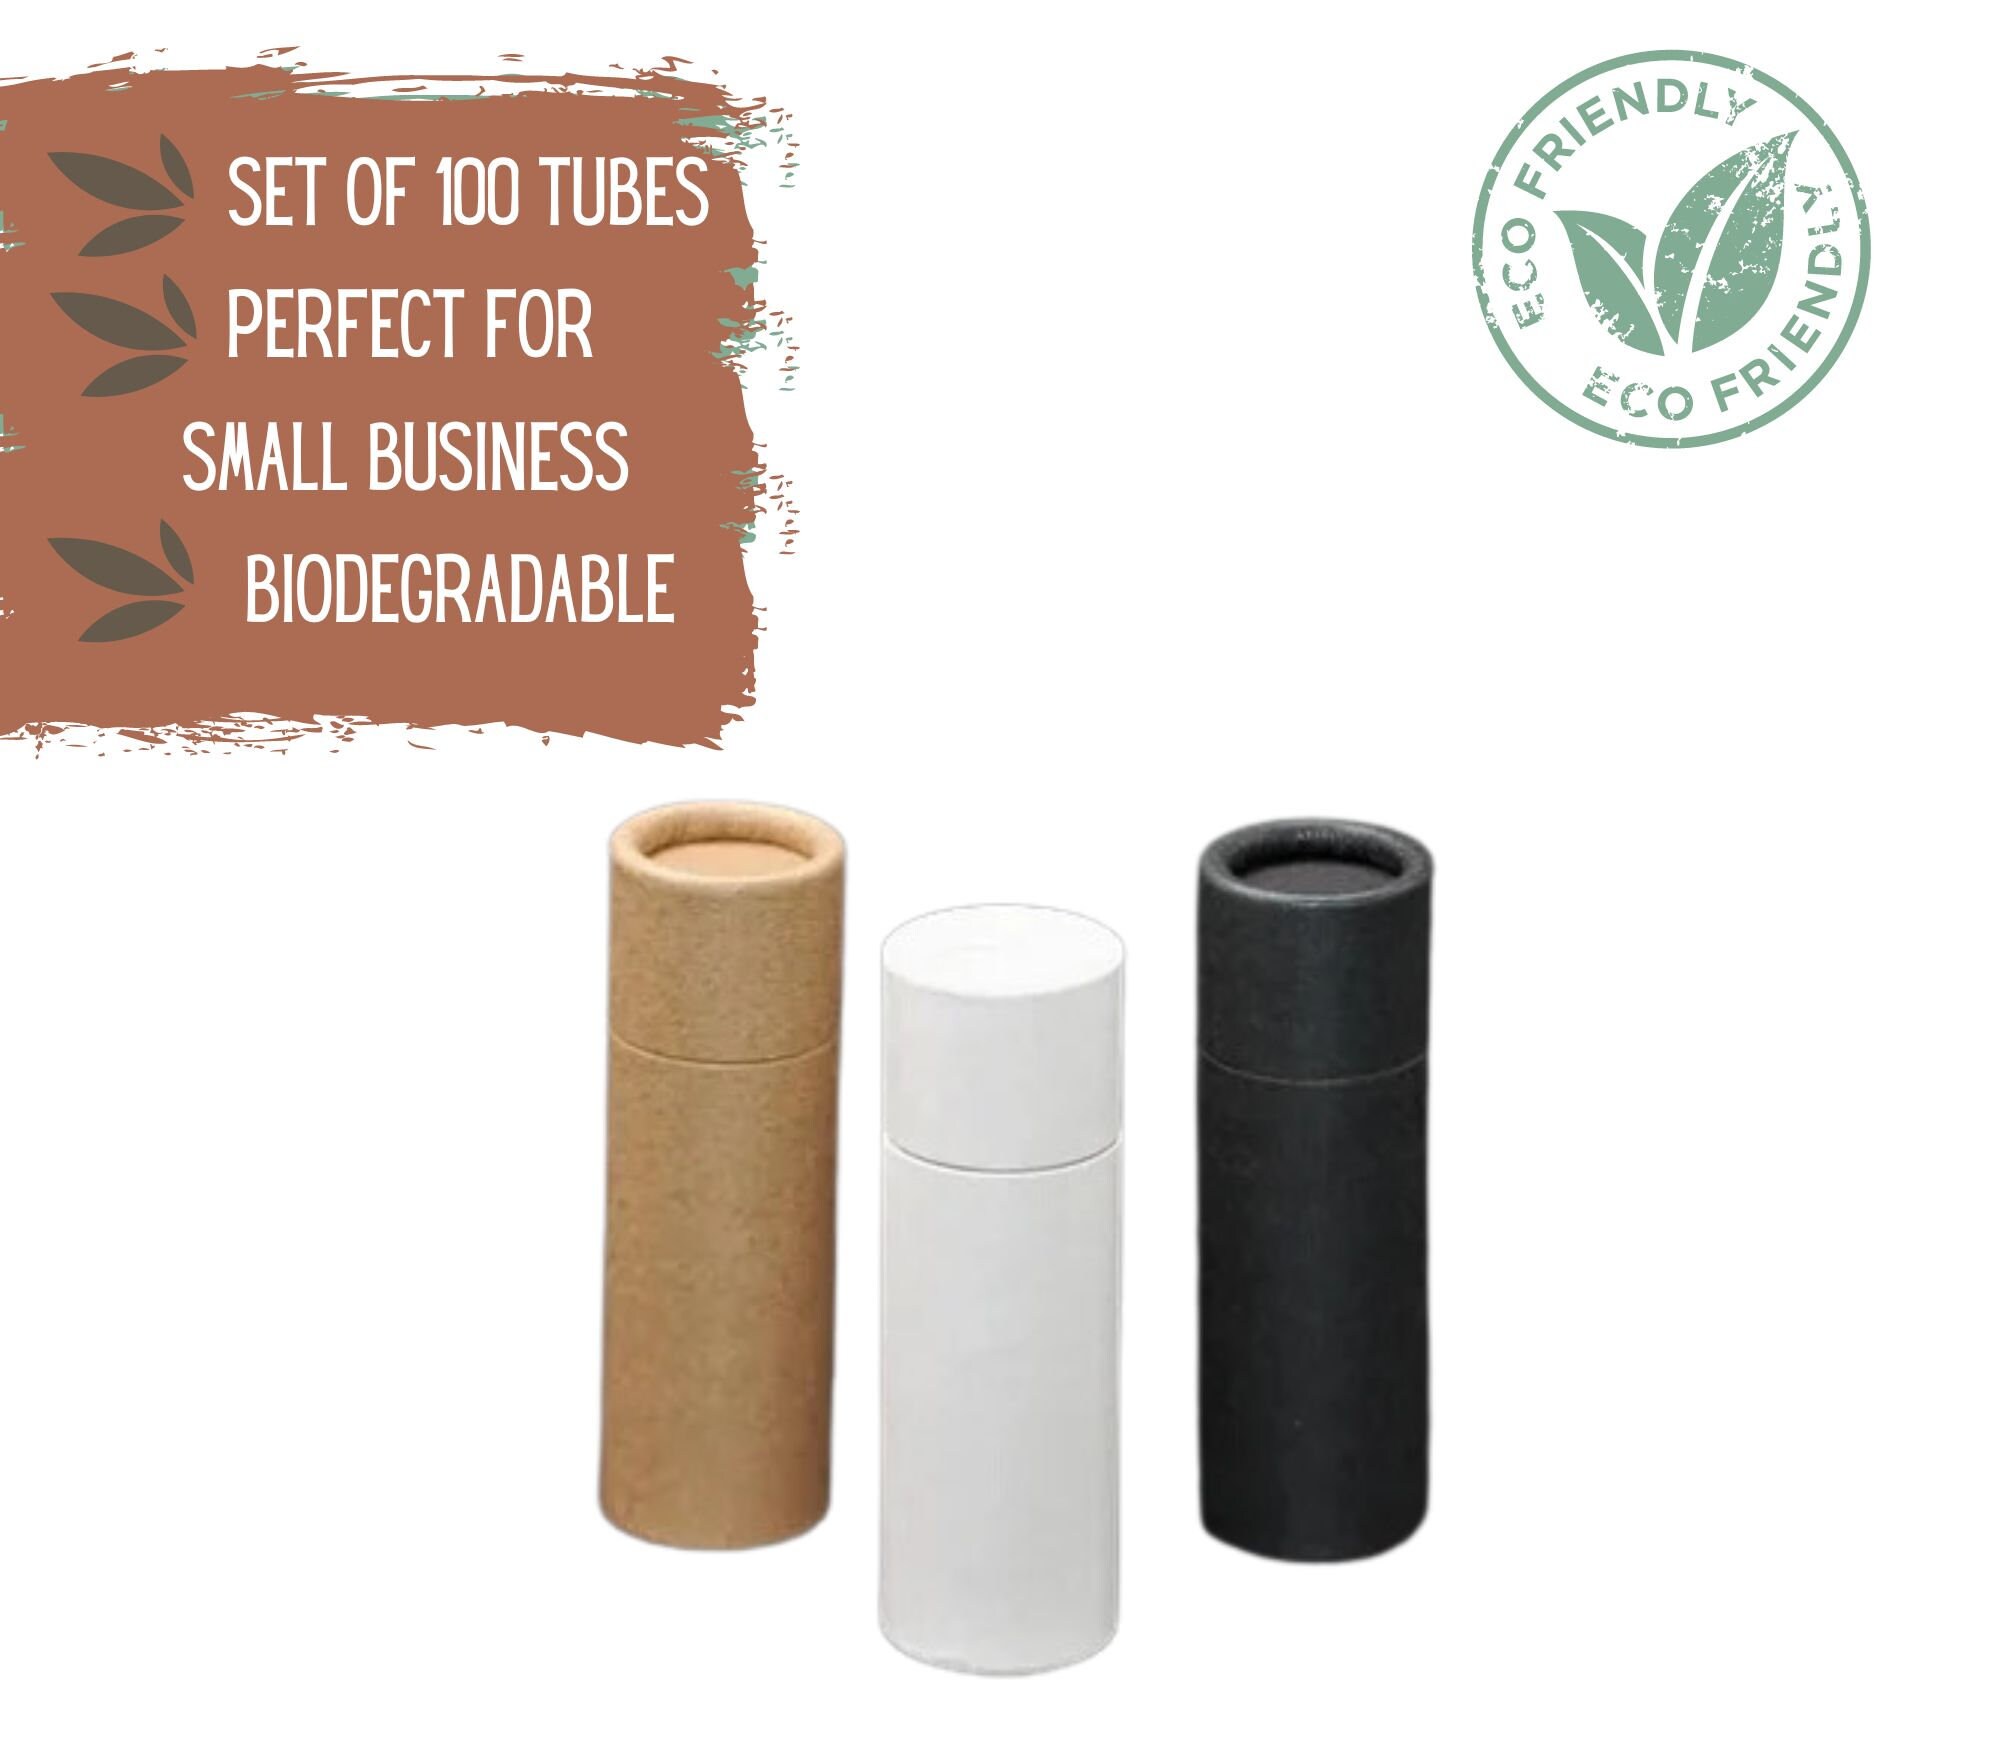 Boxes & Cartons, Mailing Tubes, Heavy-Duty Mailing Tube with Cap,  48"L x 6" Dia., Kraft